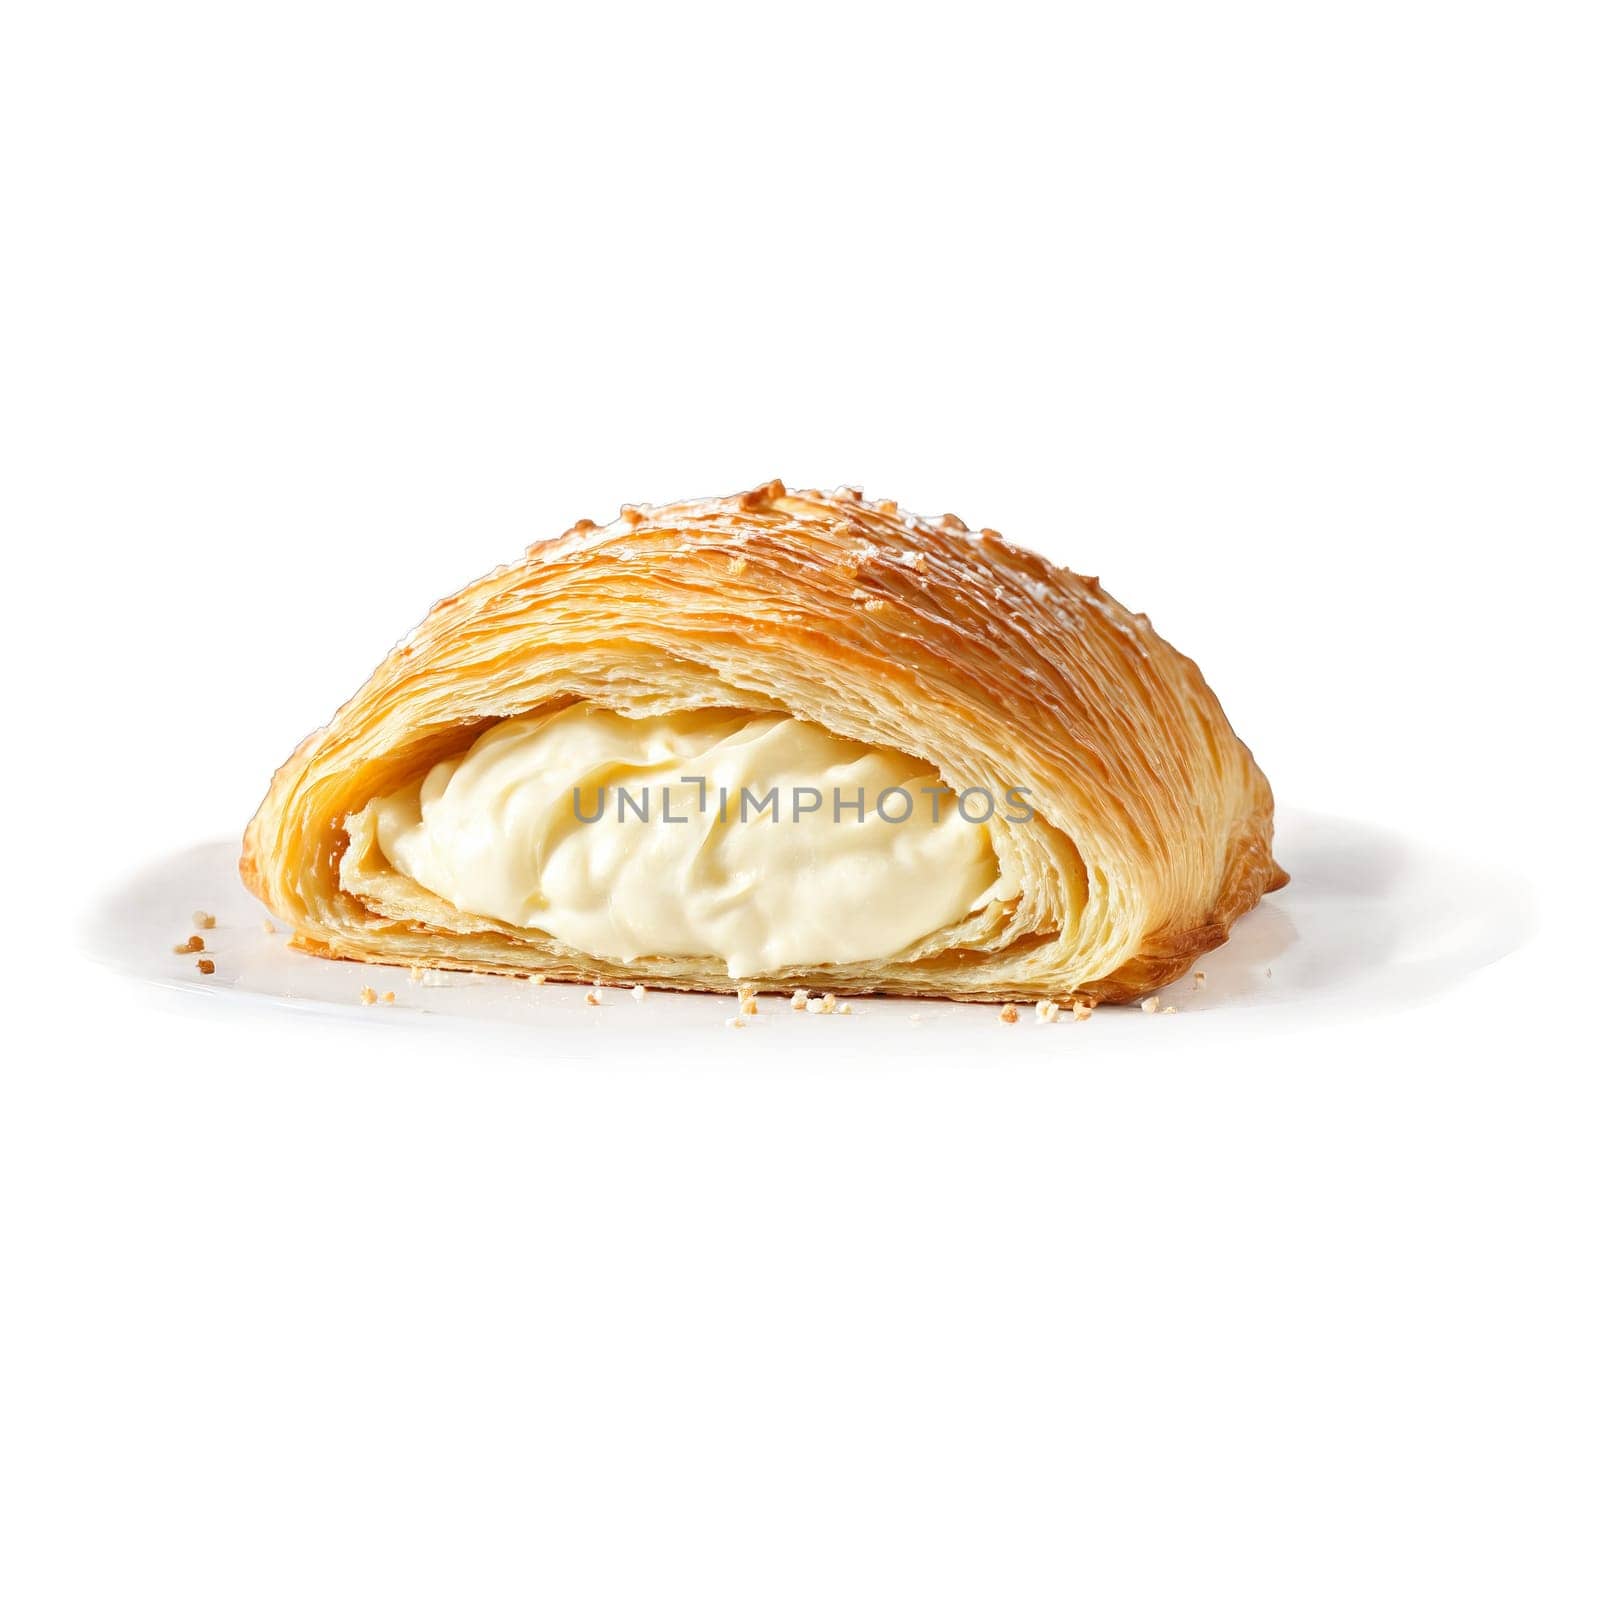 Sfogliatelle with flaky pastry and ricotta filling in cross section Food and culinary concept. Food isolated on transparent background.